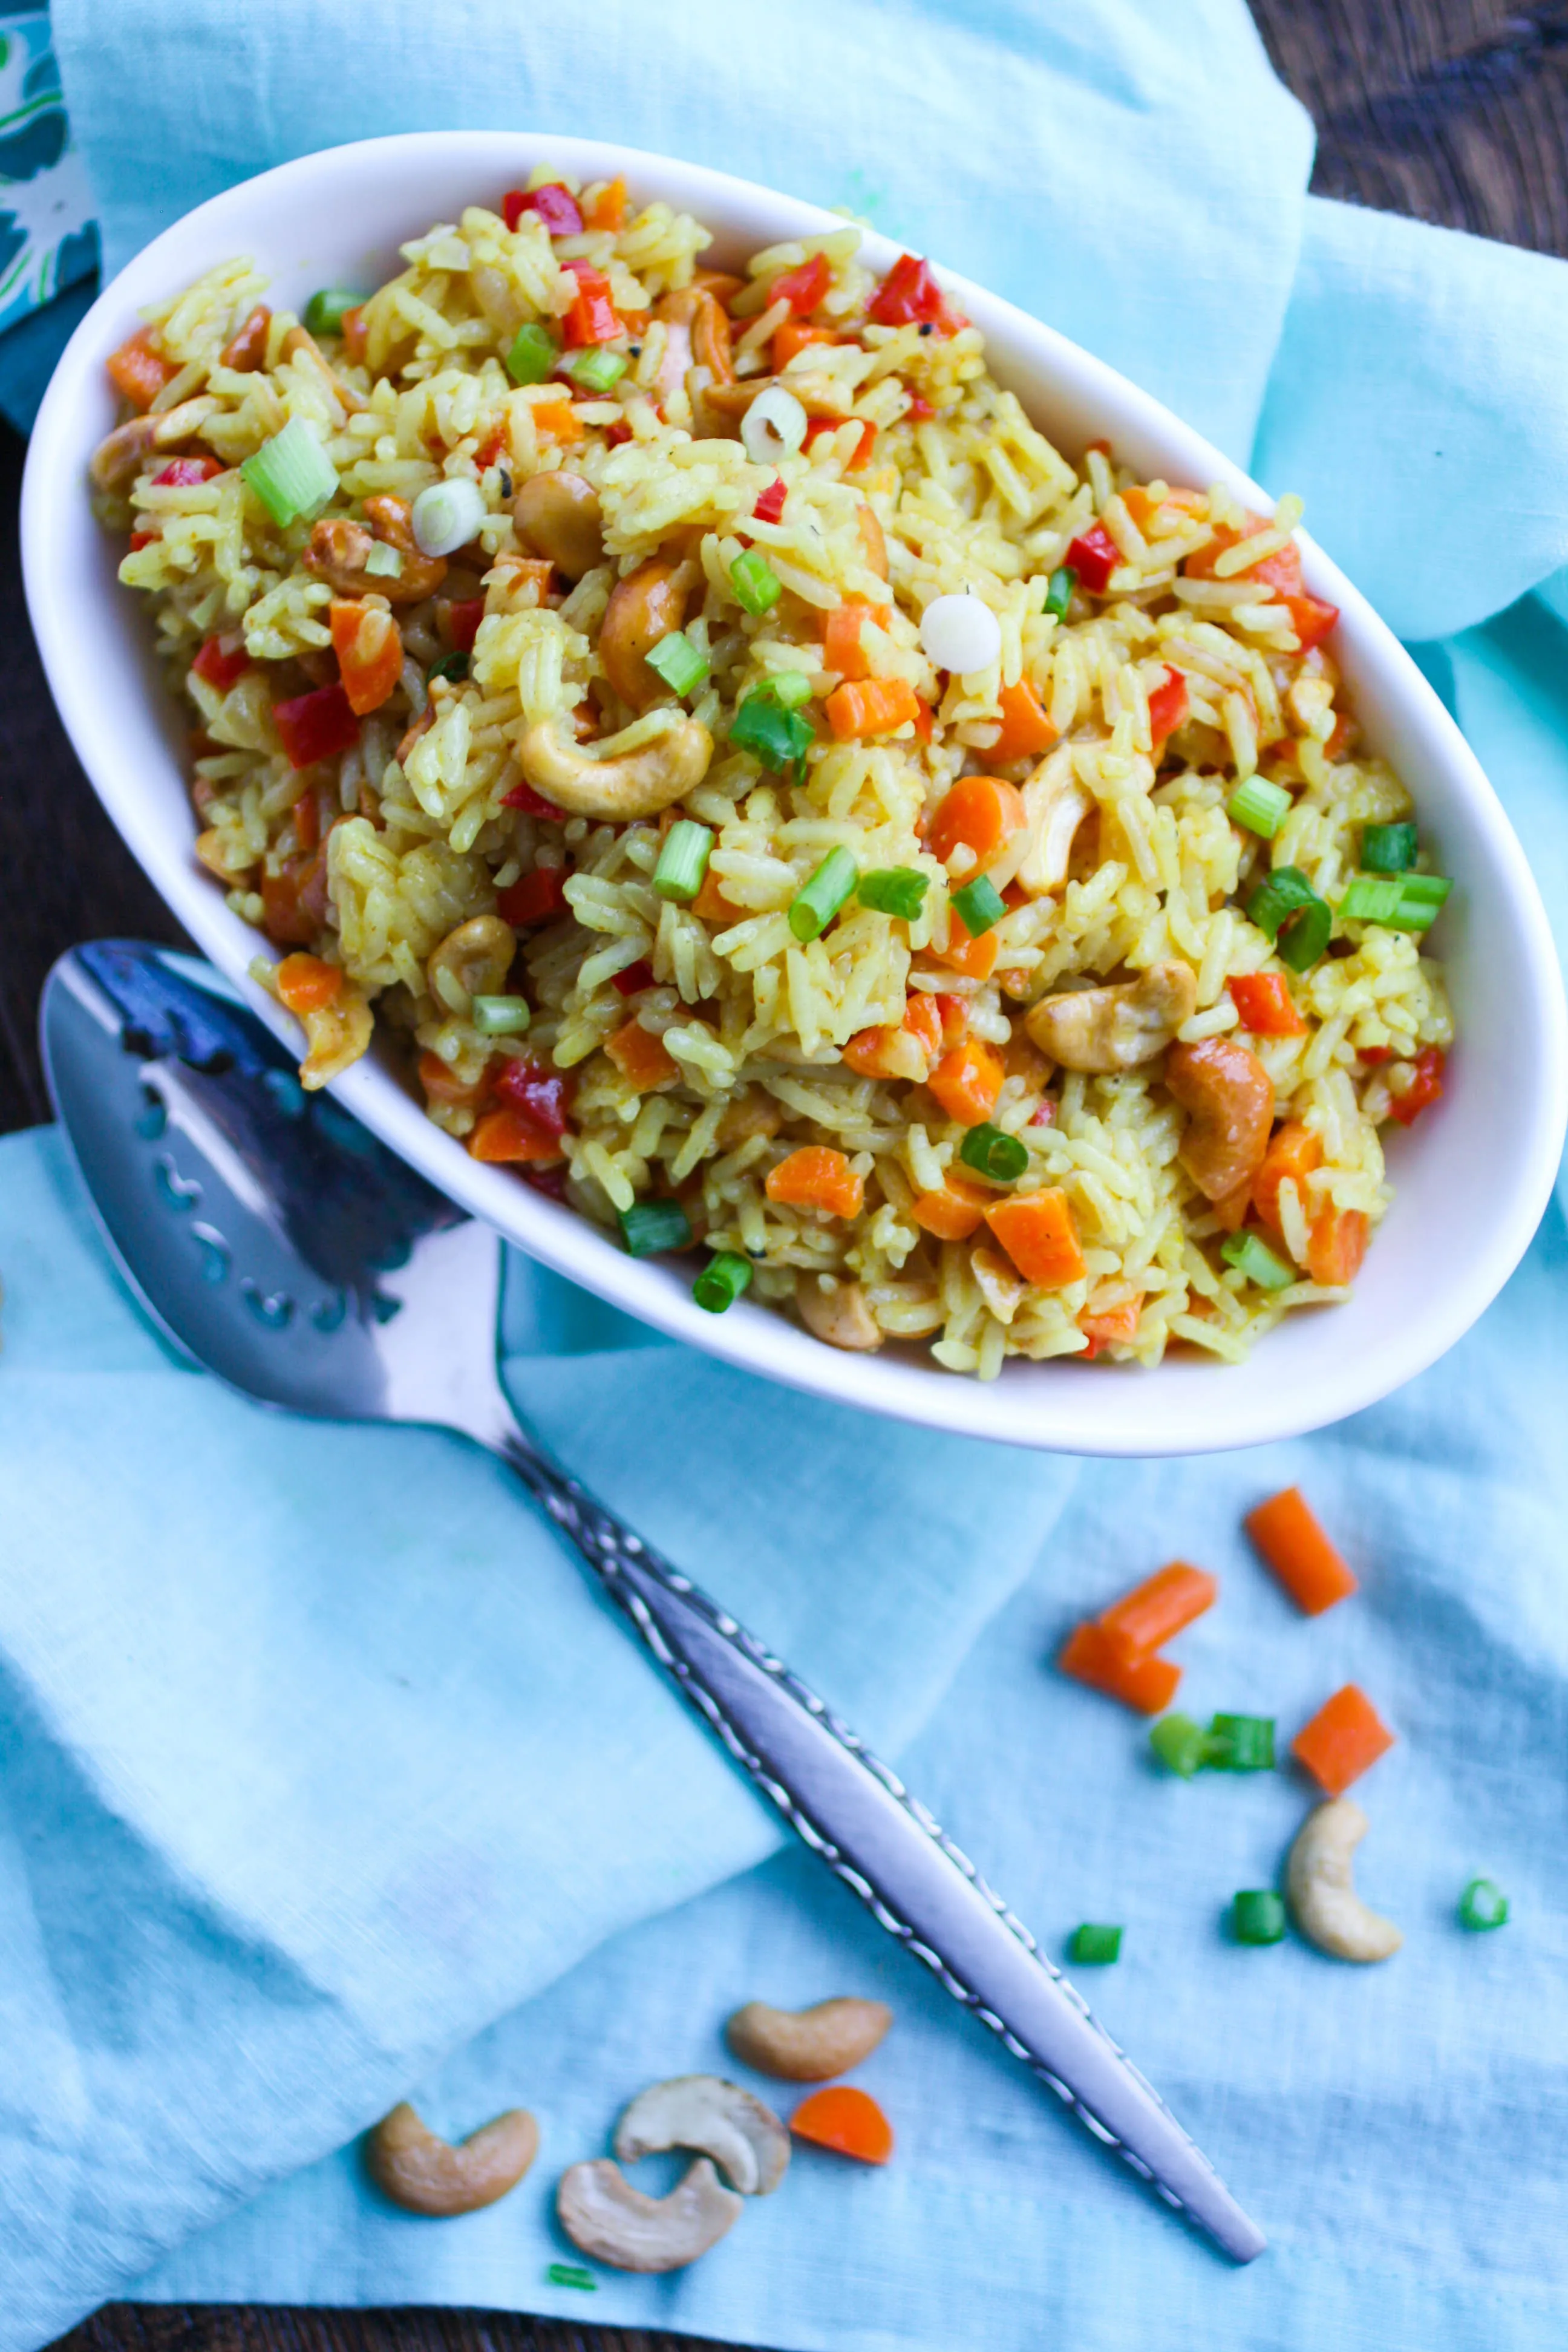 Coconut Carrot and Cashew Rice Pilaf is a great side dish that's easy to make. Use the staples from your pantry to put this rice dish together!